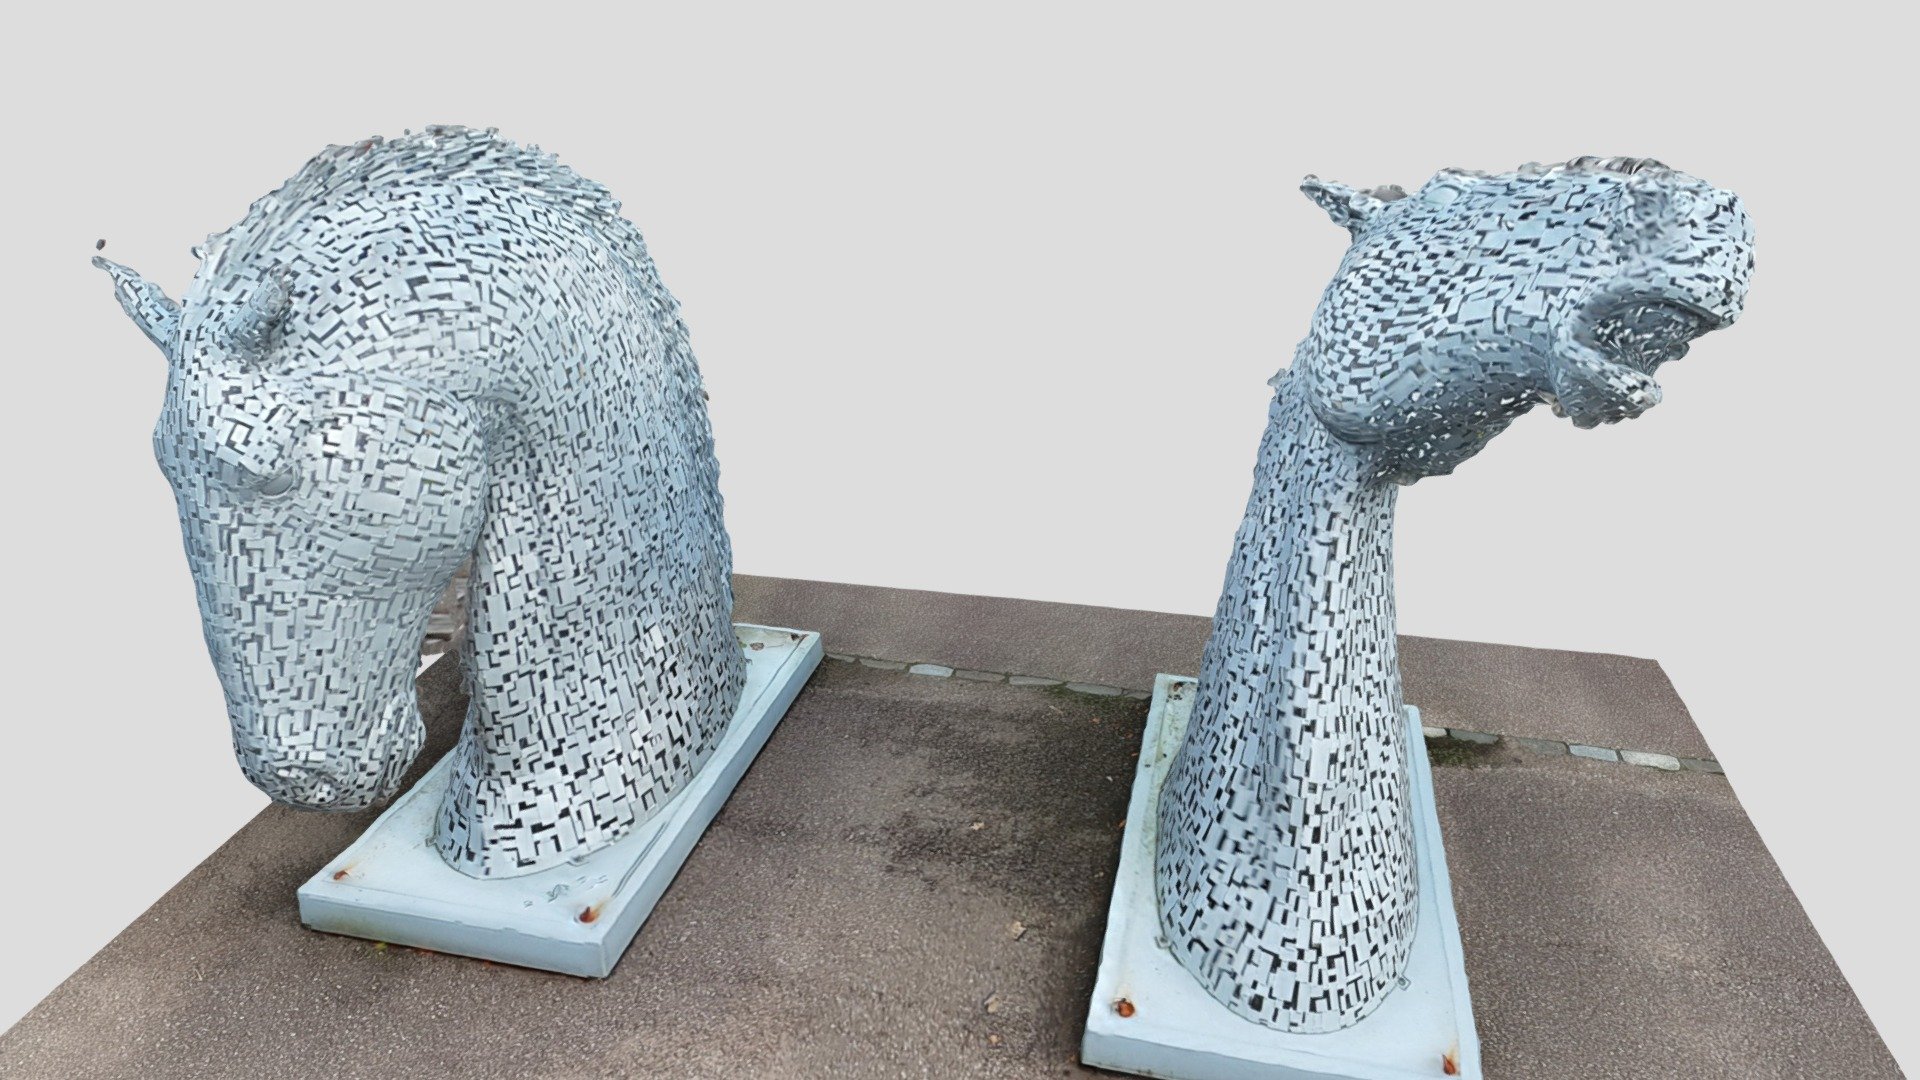 Many people are familiar with the art installationin in the Helix Park,  adjacent to the Falkirk Wheel - the large Kelpies - at 30 metres high, they are the world's largest equine sculptures, created by Andy Scott in 2013.

What is less well known is that a mini version of these iconic sculptures, the pre production  &ldquo;maquettes